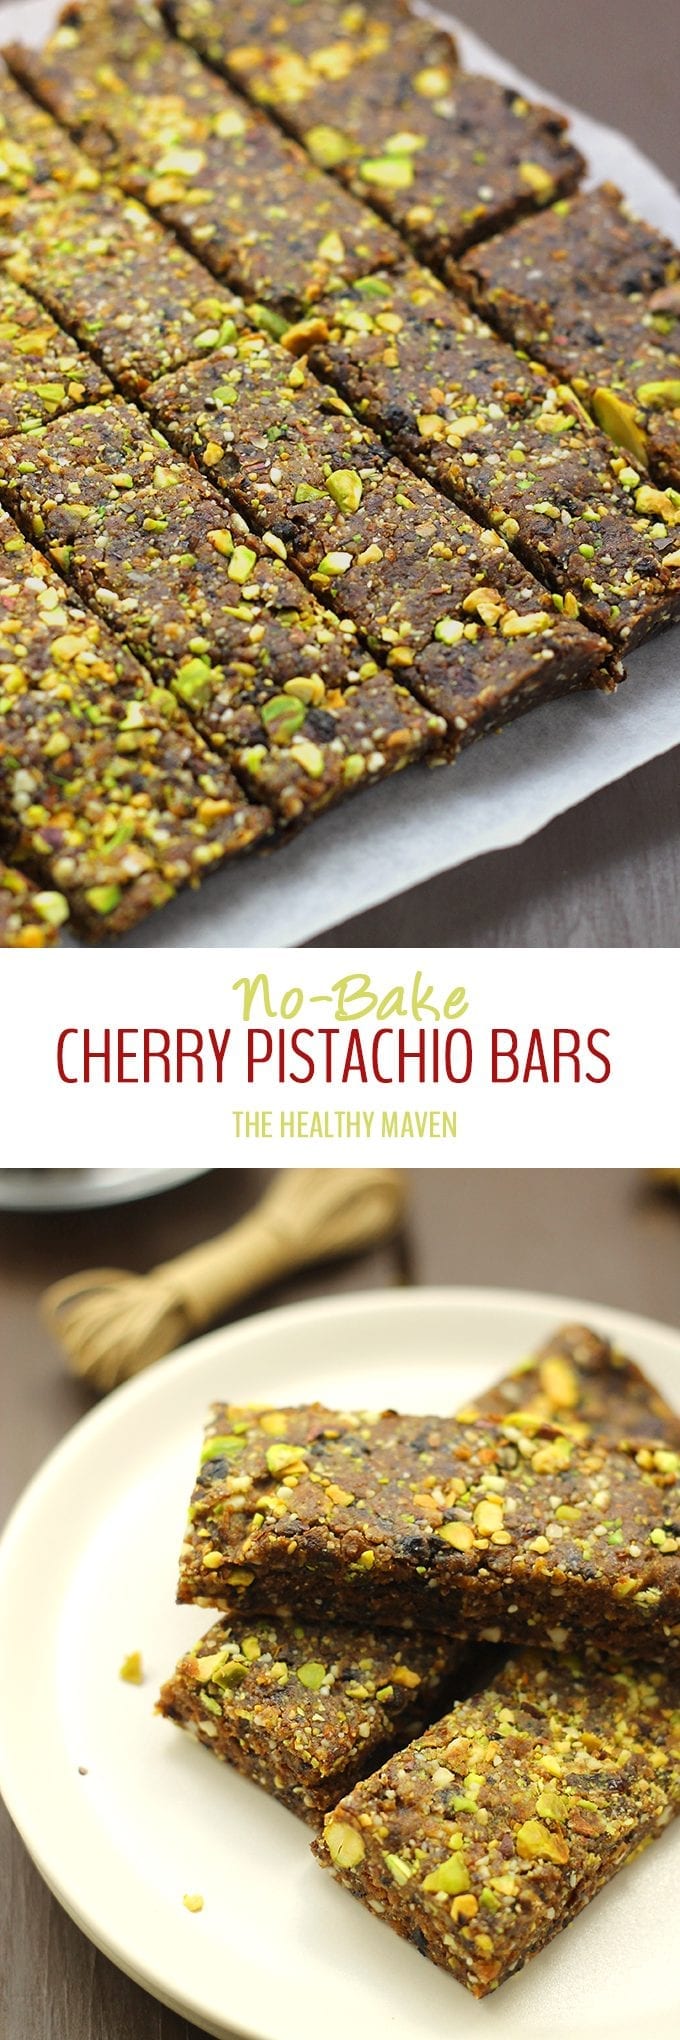 These No-Bake Cherry Pistachio Bars are made with just 5 ingredients and are ready in 20 minutes. They're also completely raw and make a fantastic snack on the run. Who says you need to turn your oven on to make yourself a great snack! 